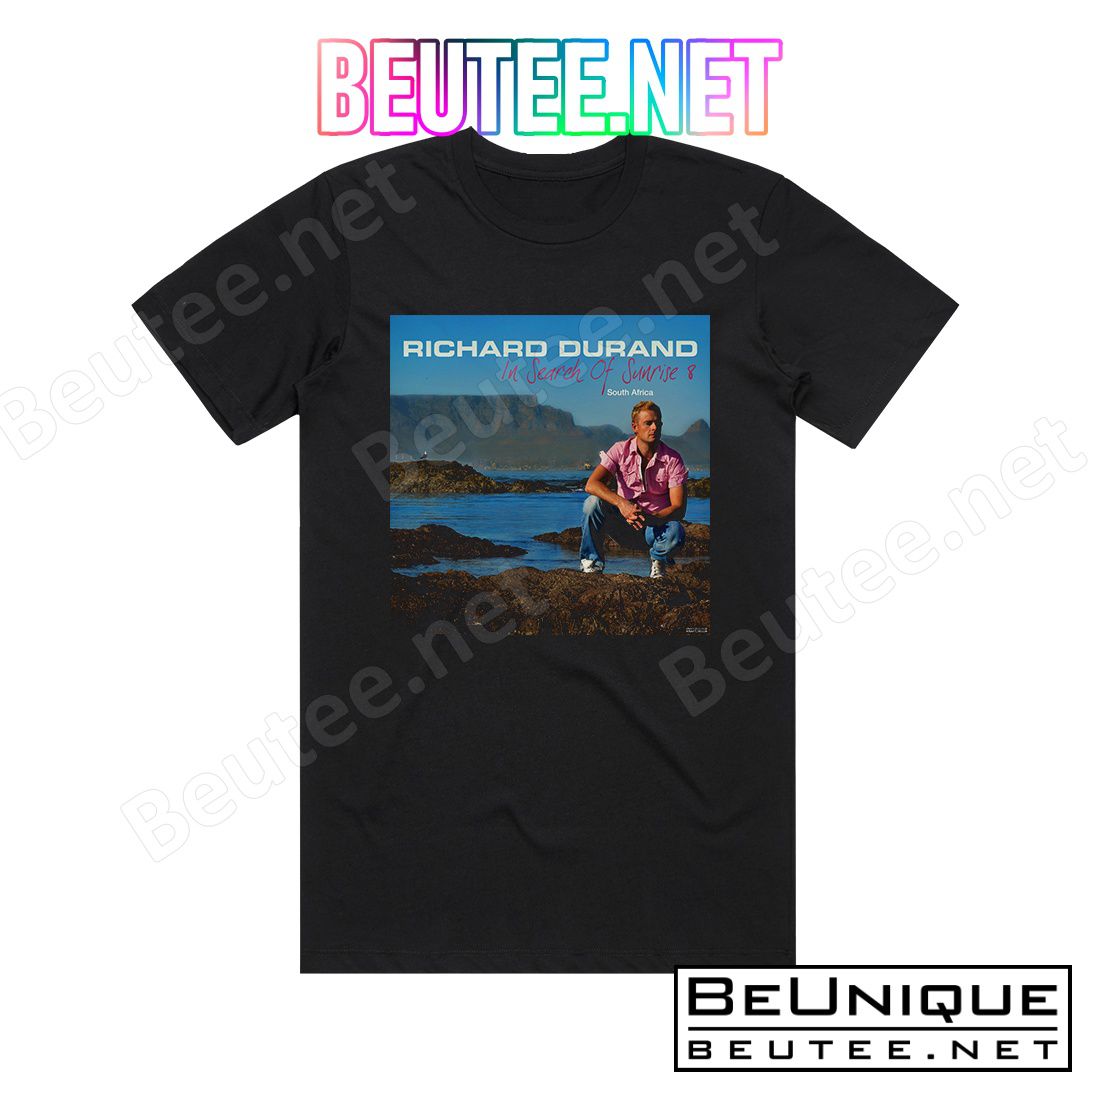 Richard Durand In Search Of Sunrise 8 South Africa Album Cover T-Shirt